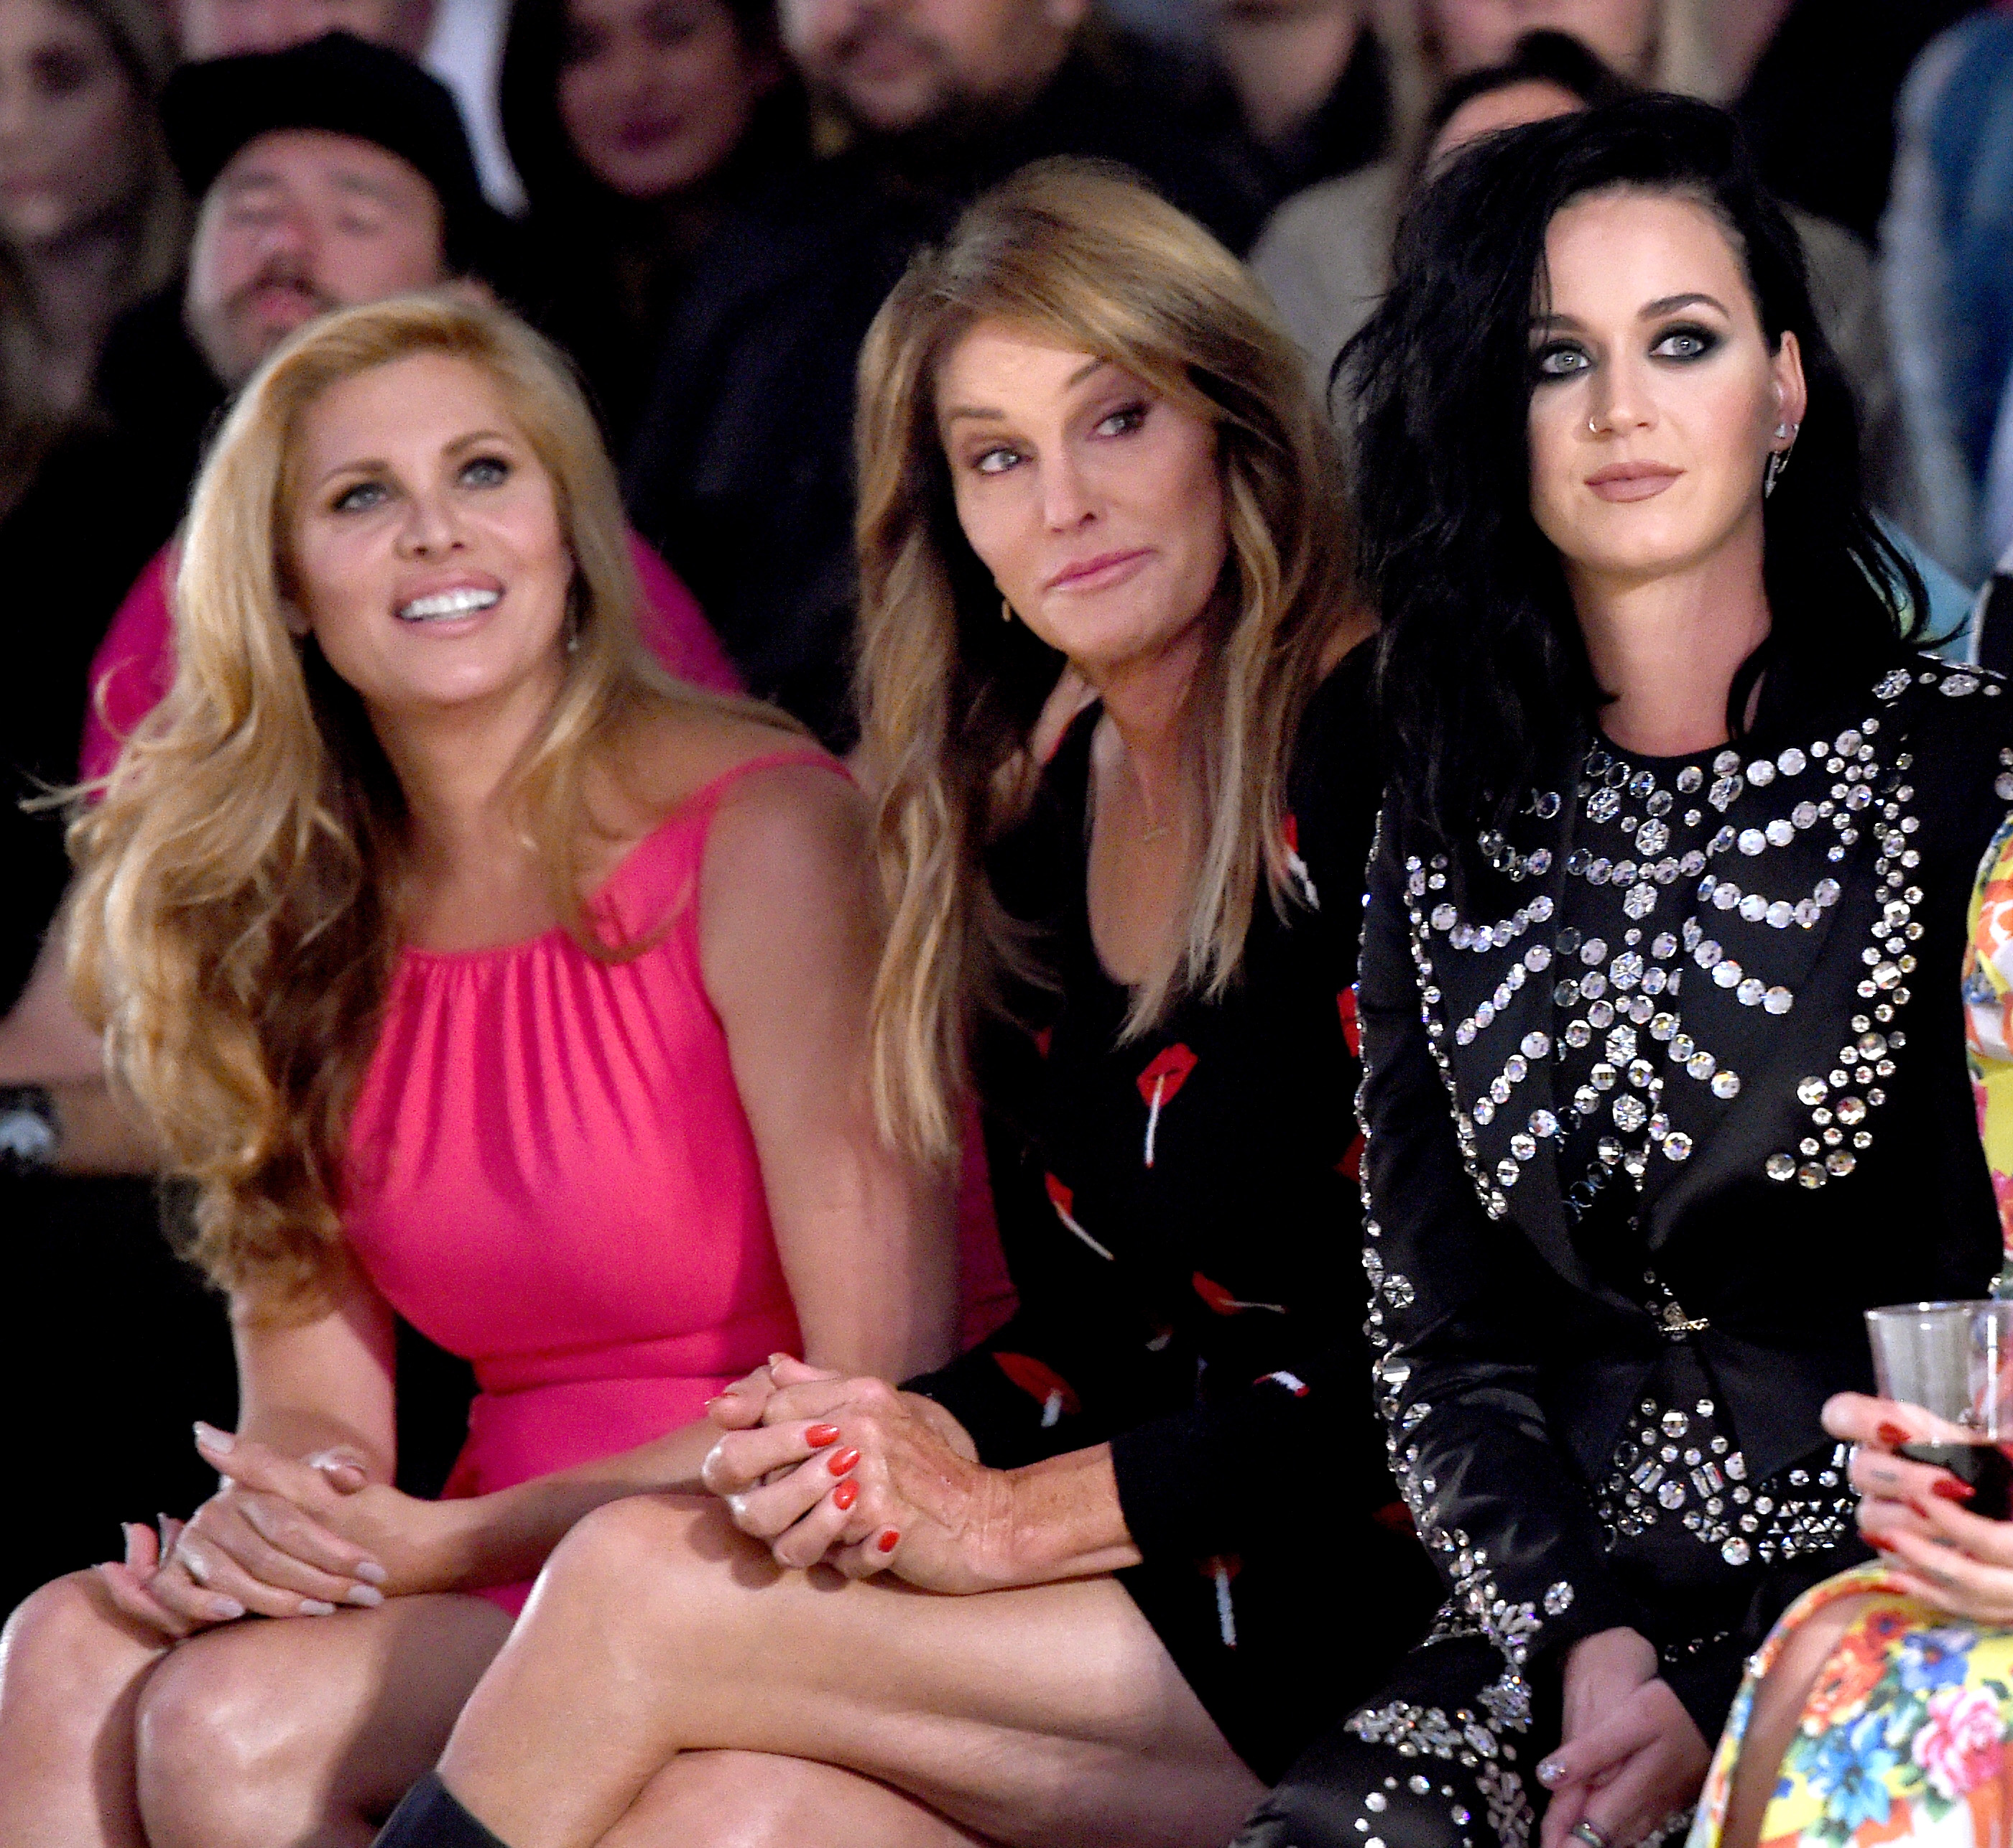 Katy Perry & Caitlyn Jenner at the Made LA: Moschi